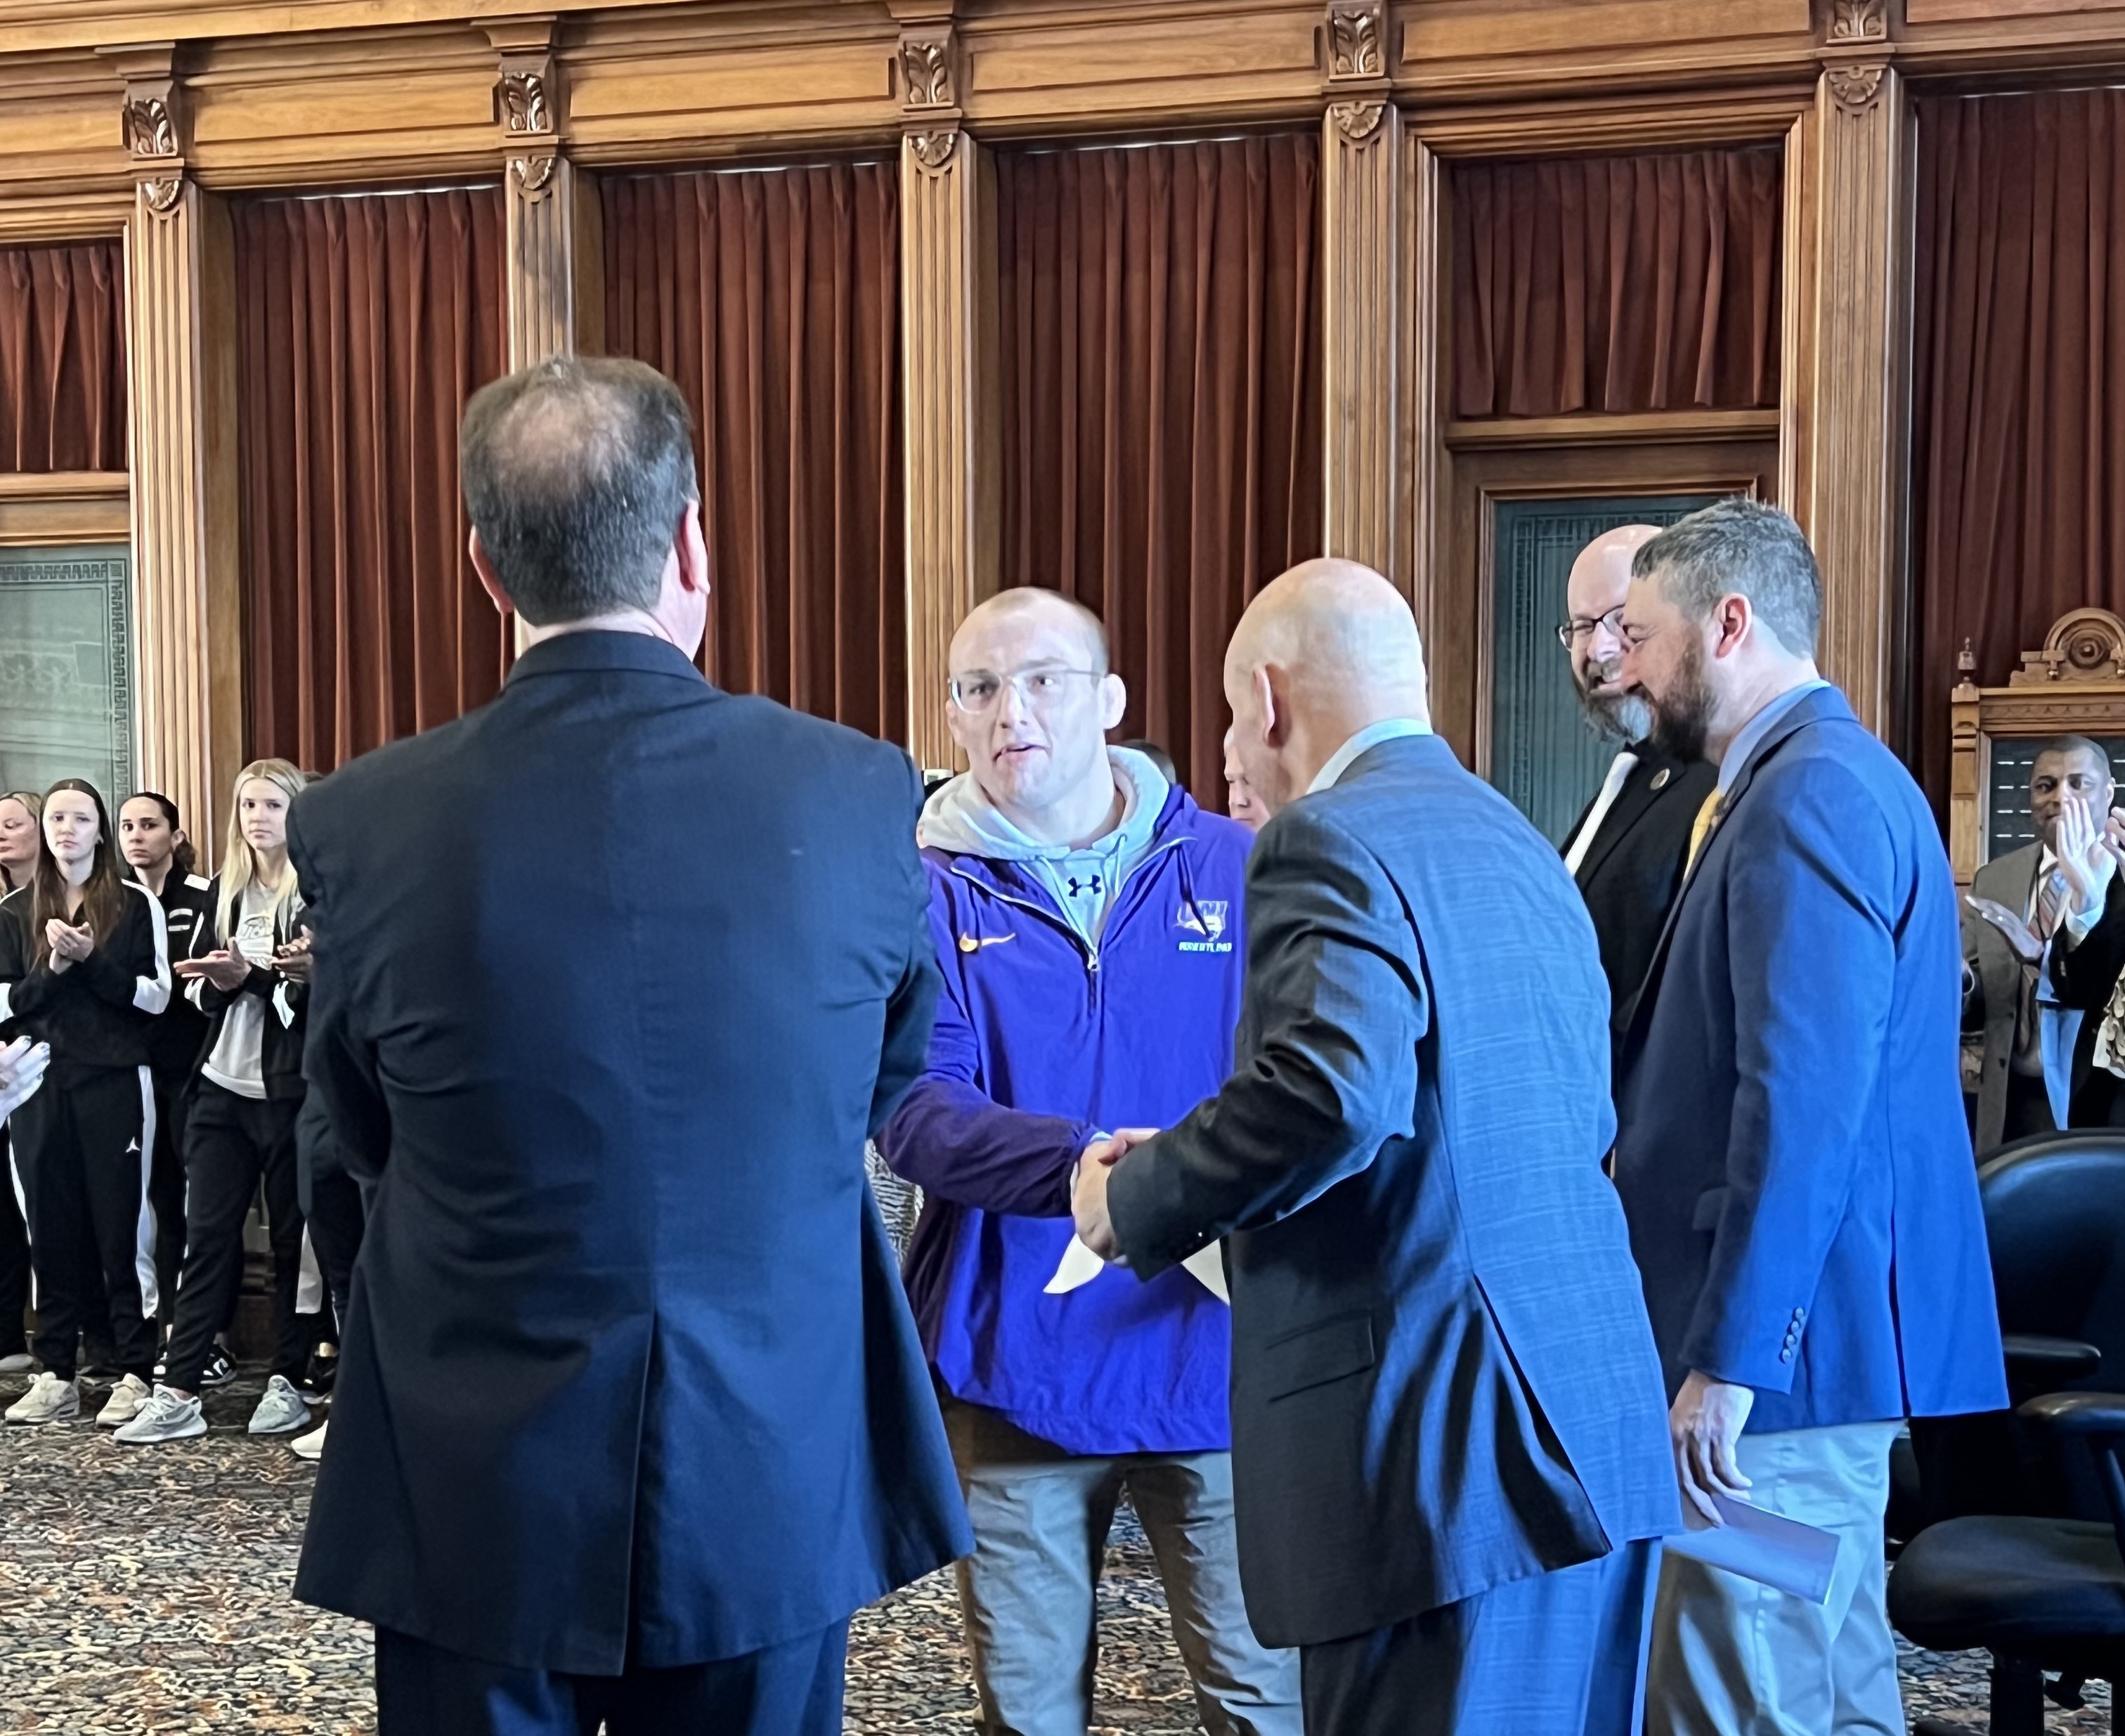 Parker Keckeisen shaking hands with lawmakers